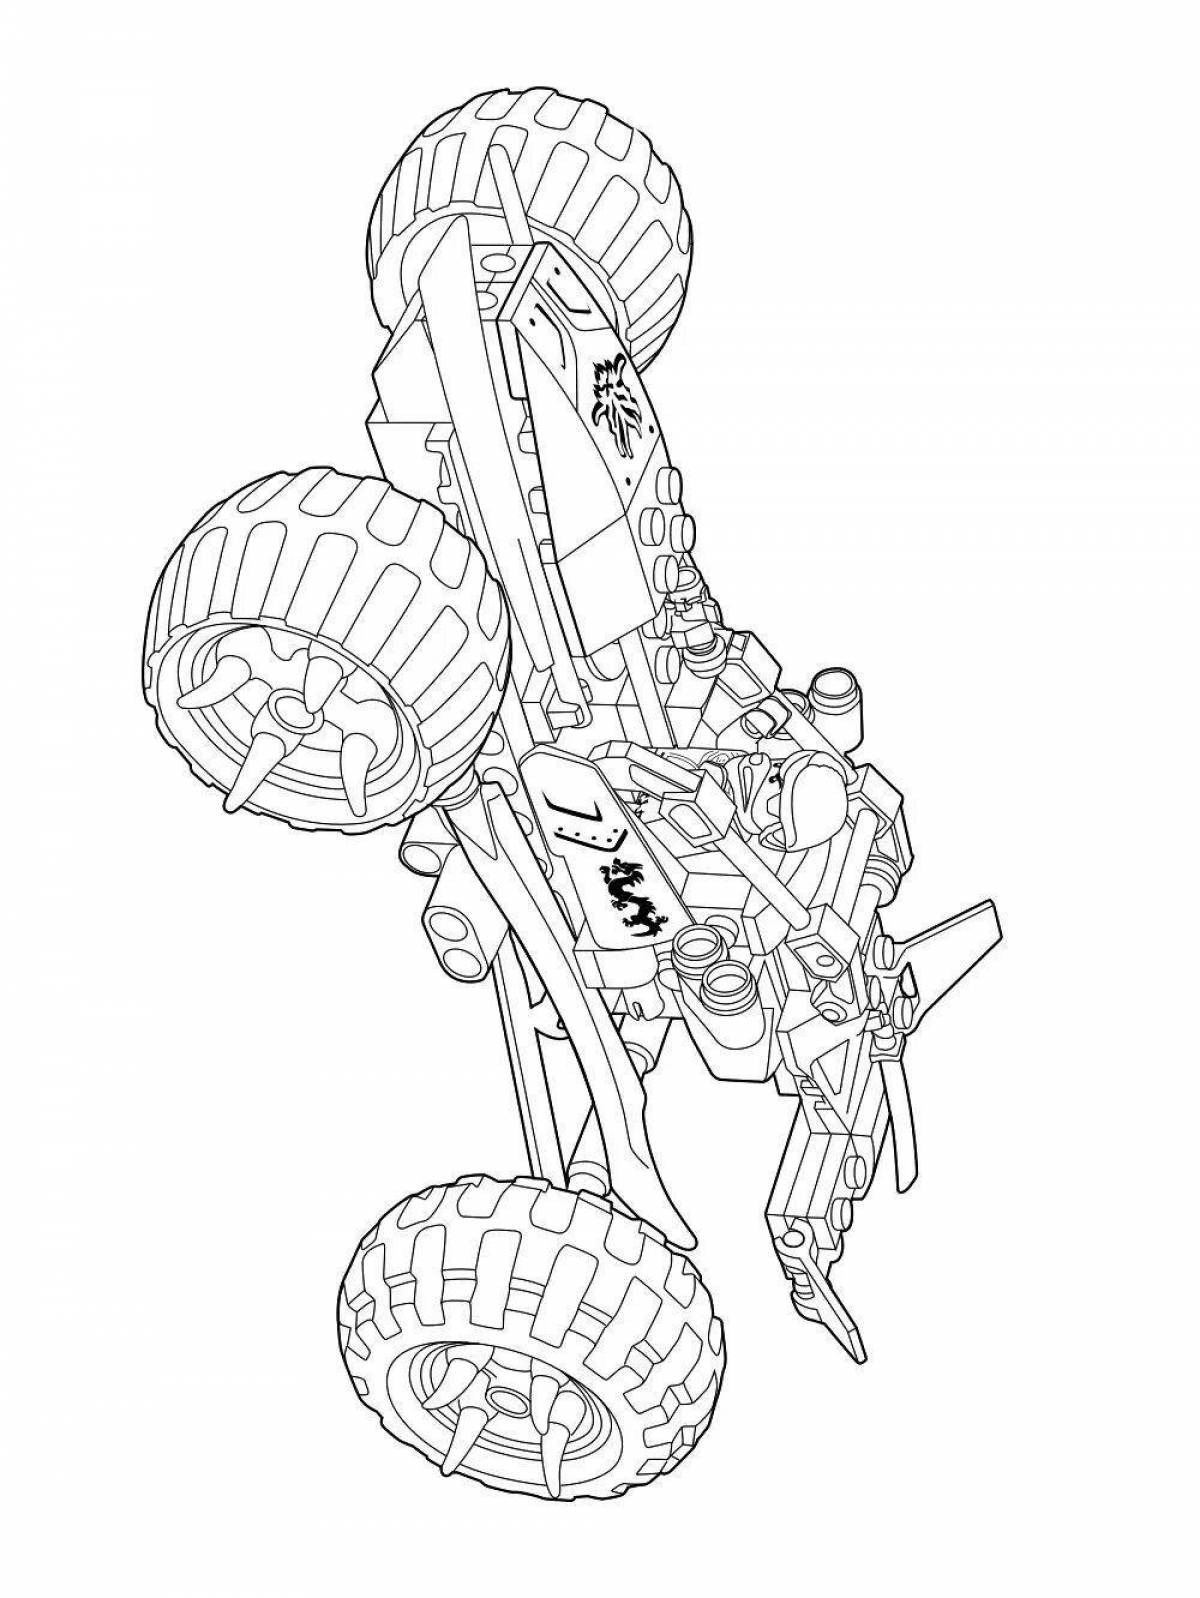 Colored holiday buggy coloring book